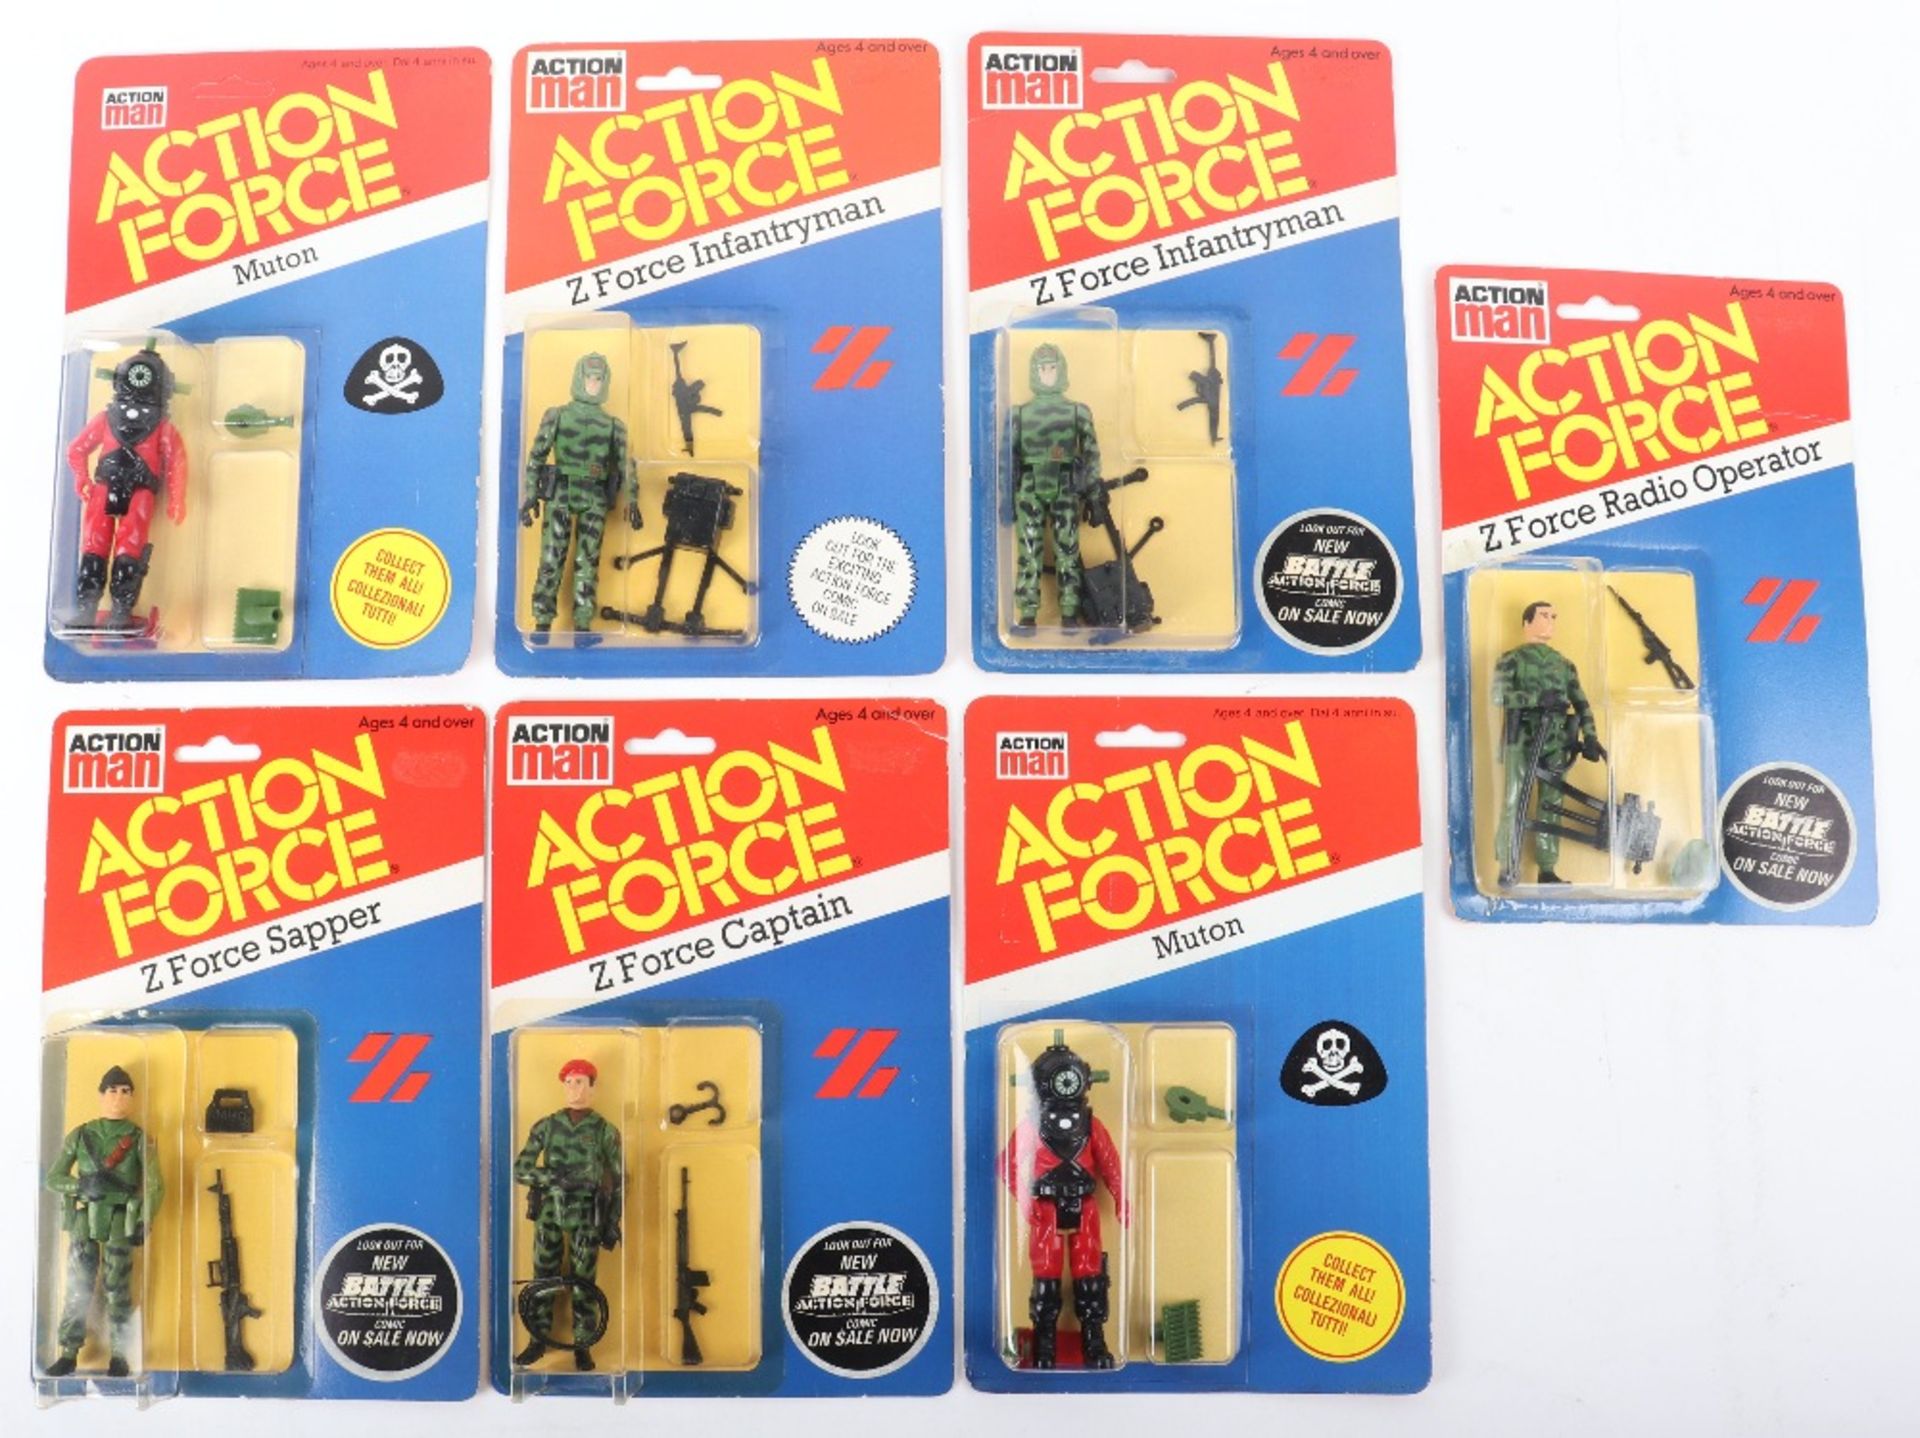 Vintage Palitoy Action man action force carded figures